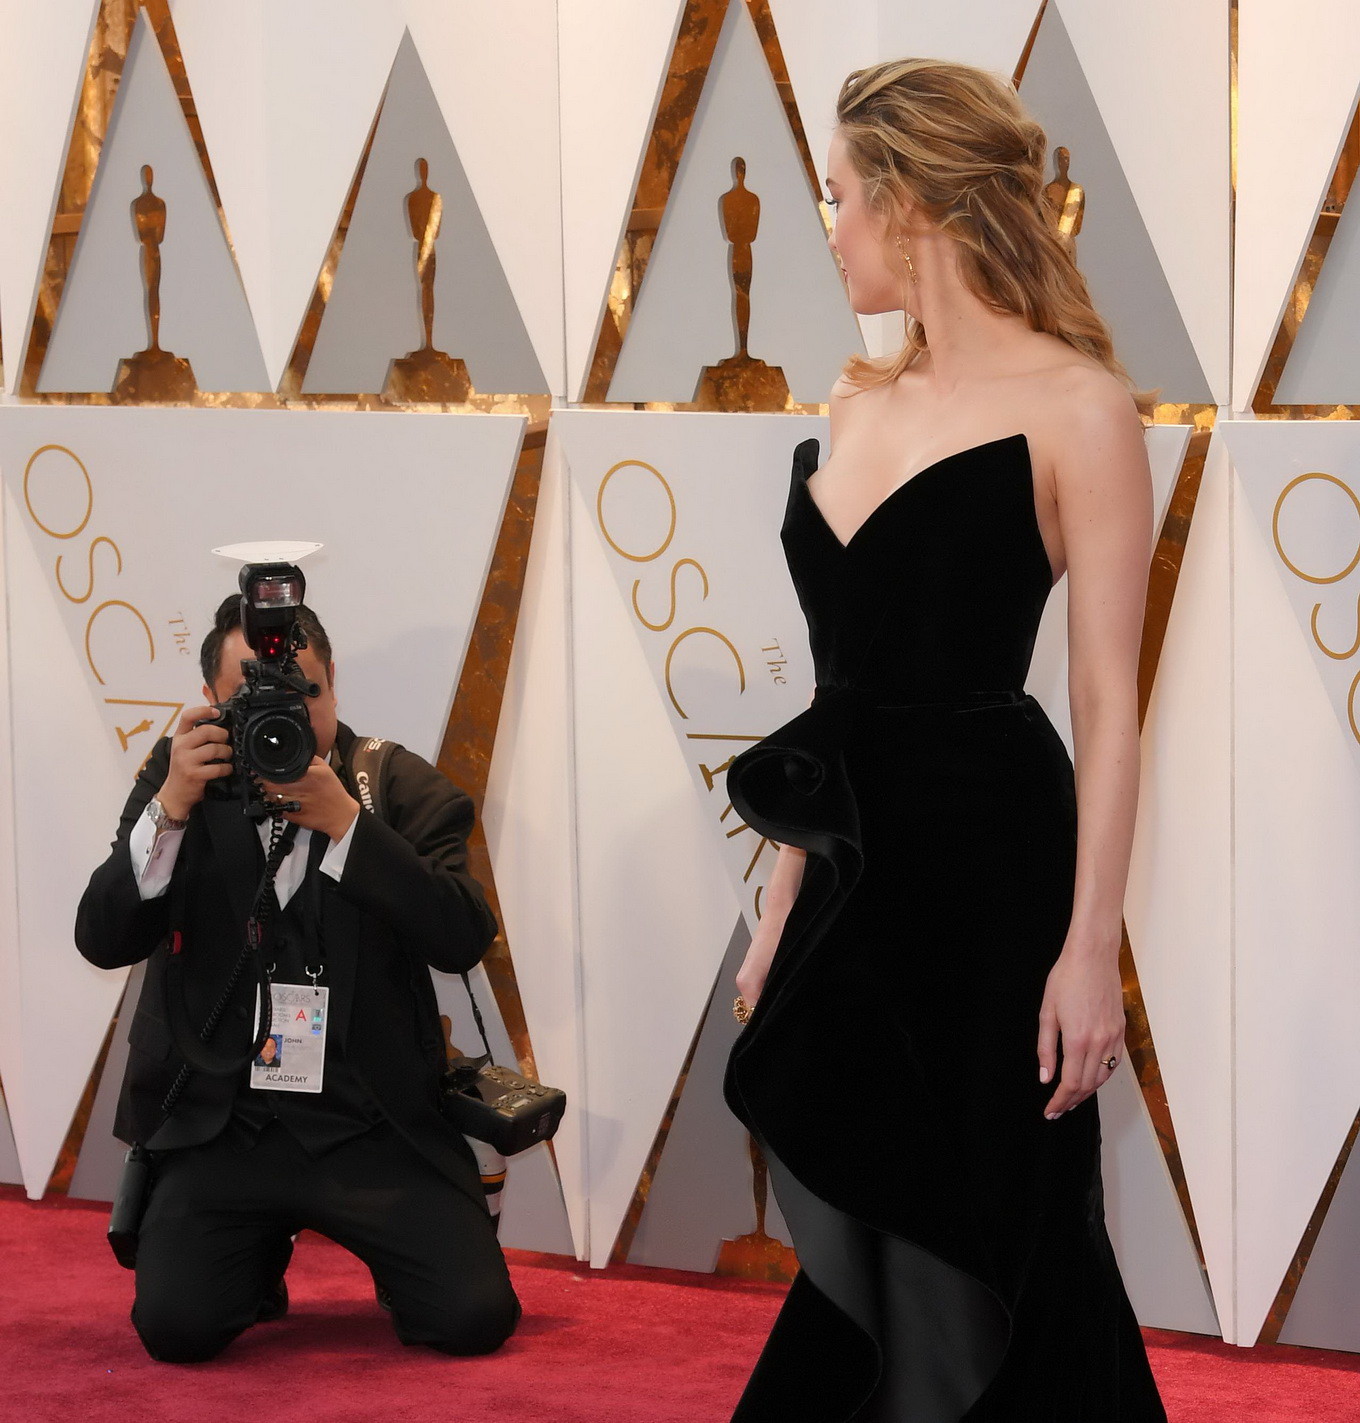 Brie Larson busty in black plunging strapless gown #75139622